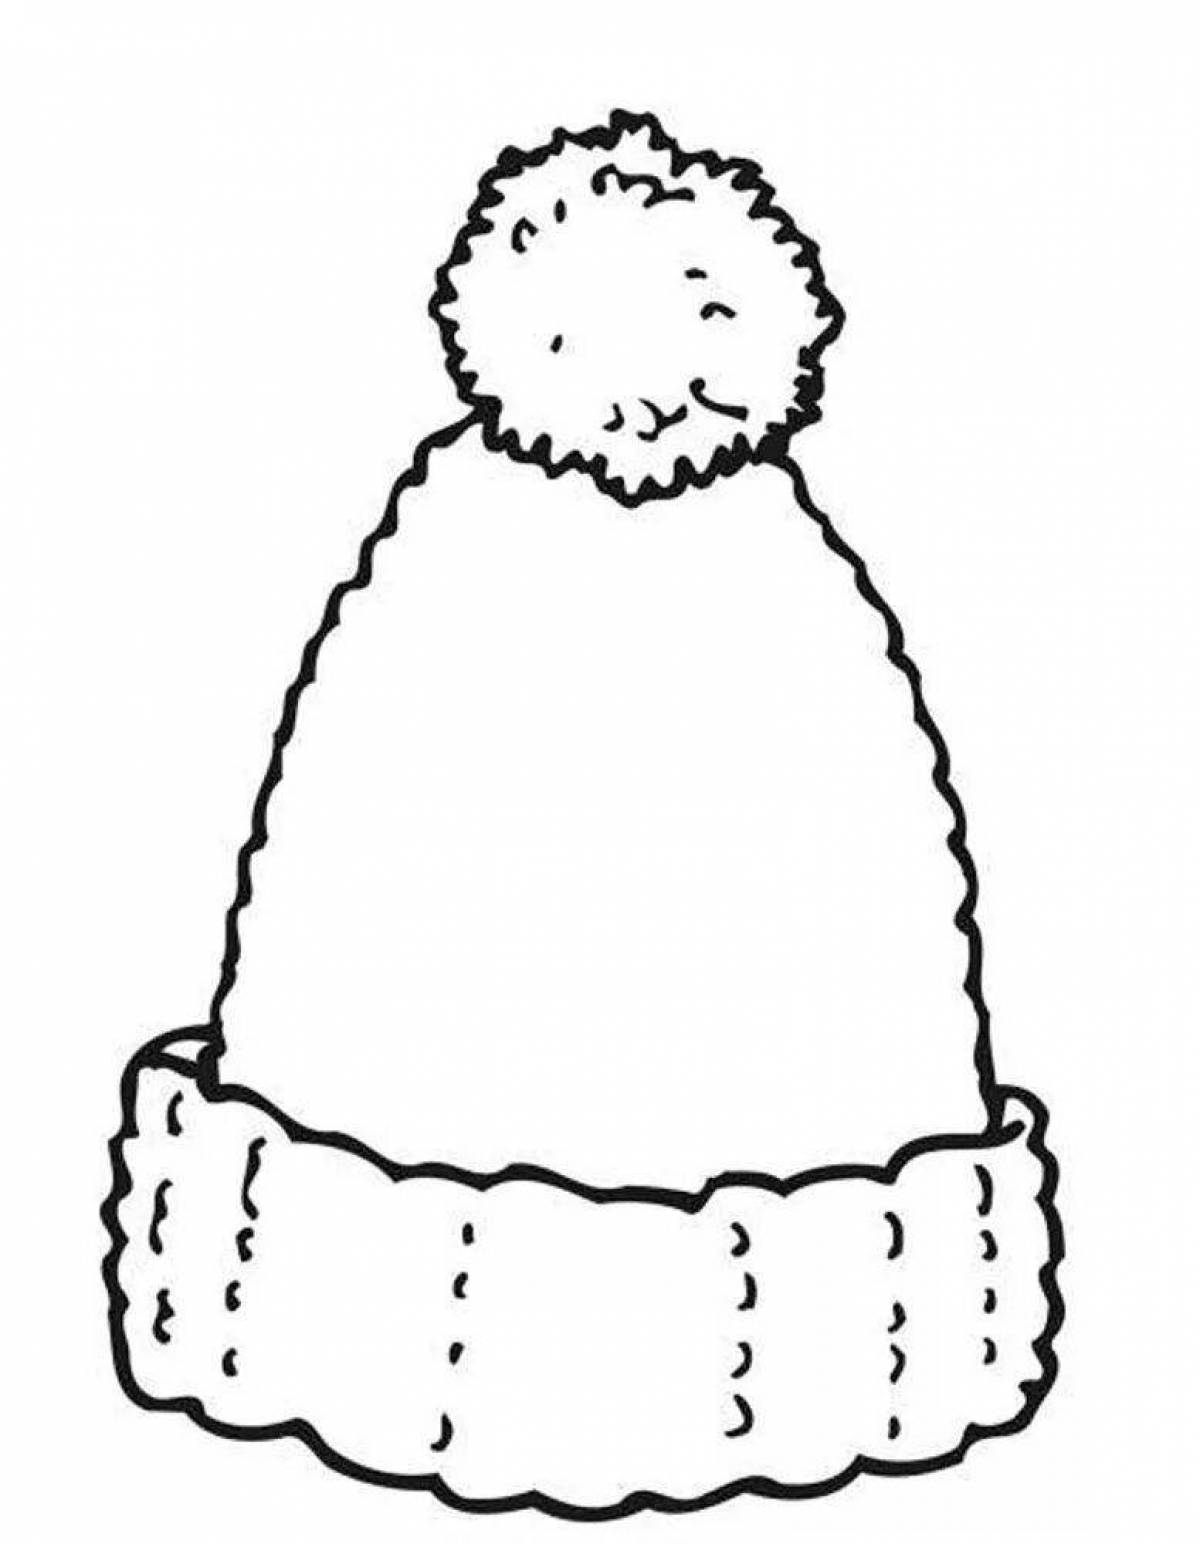 Coloring page luminous hat with pompom